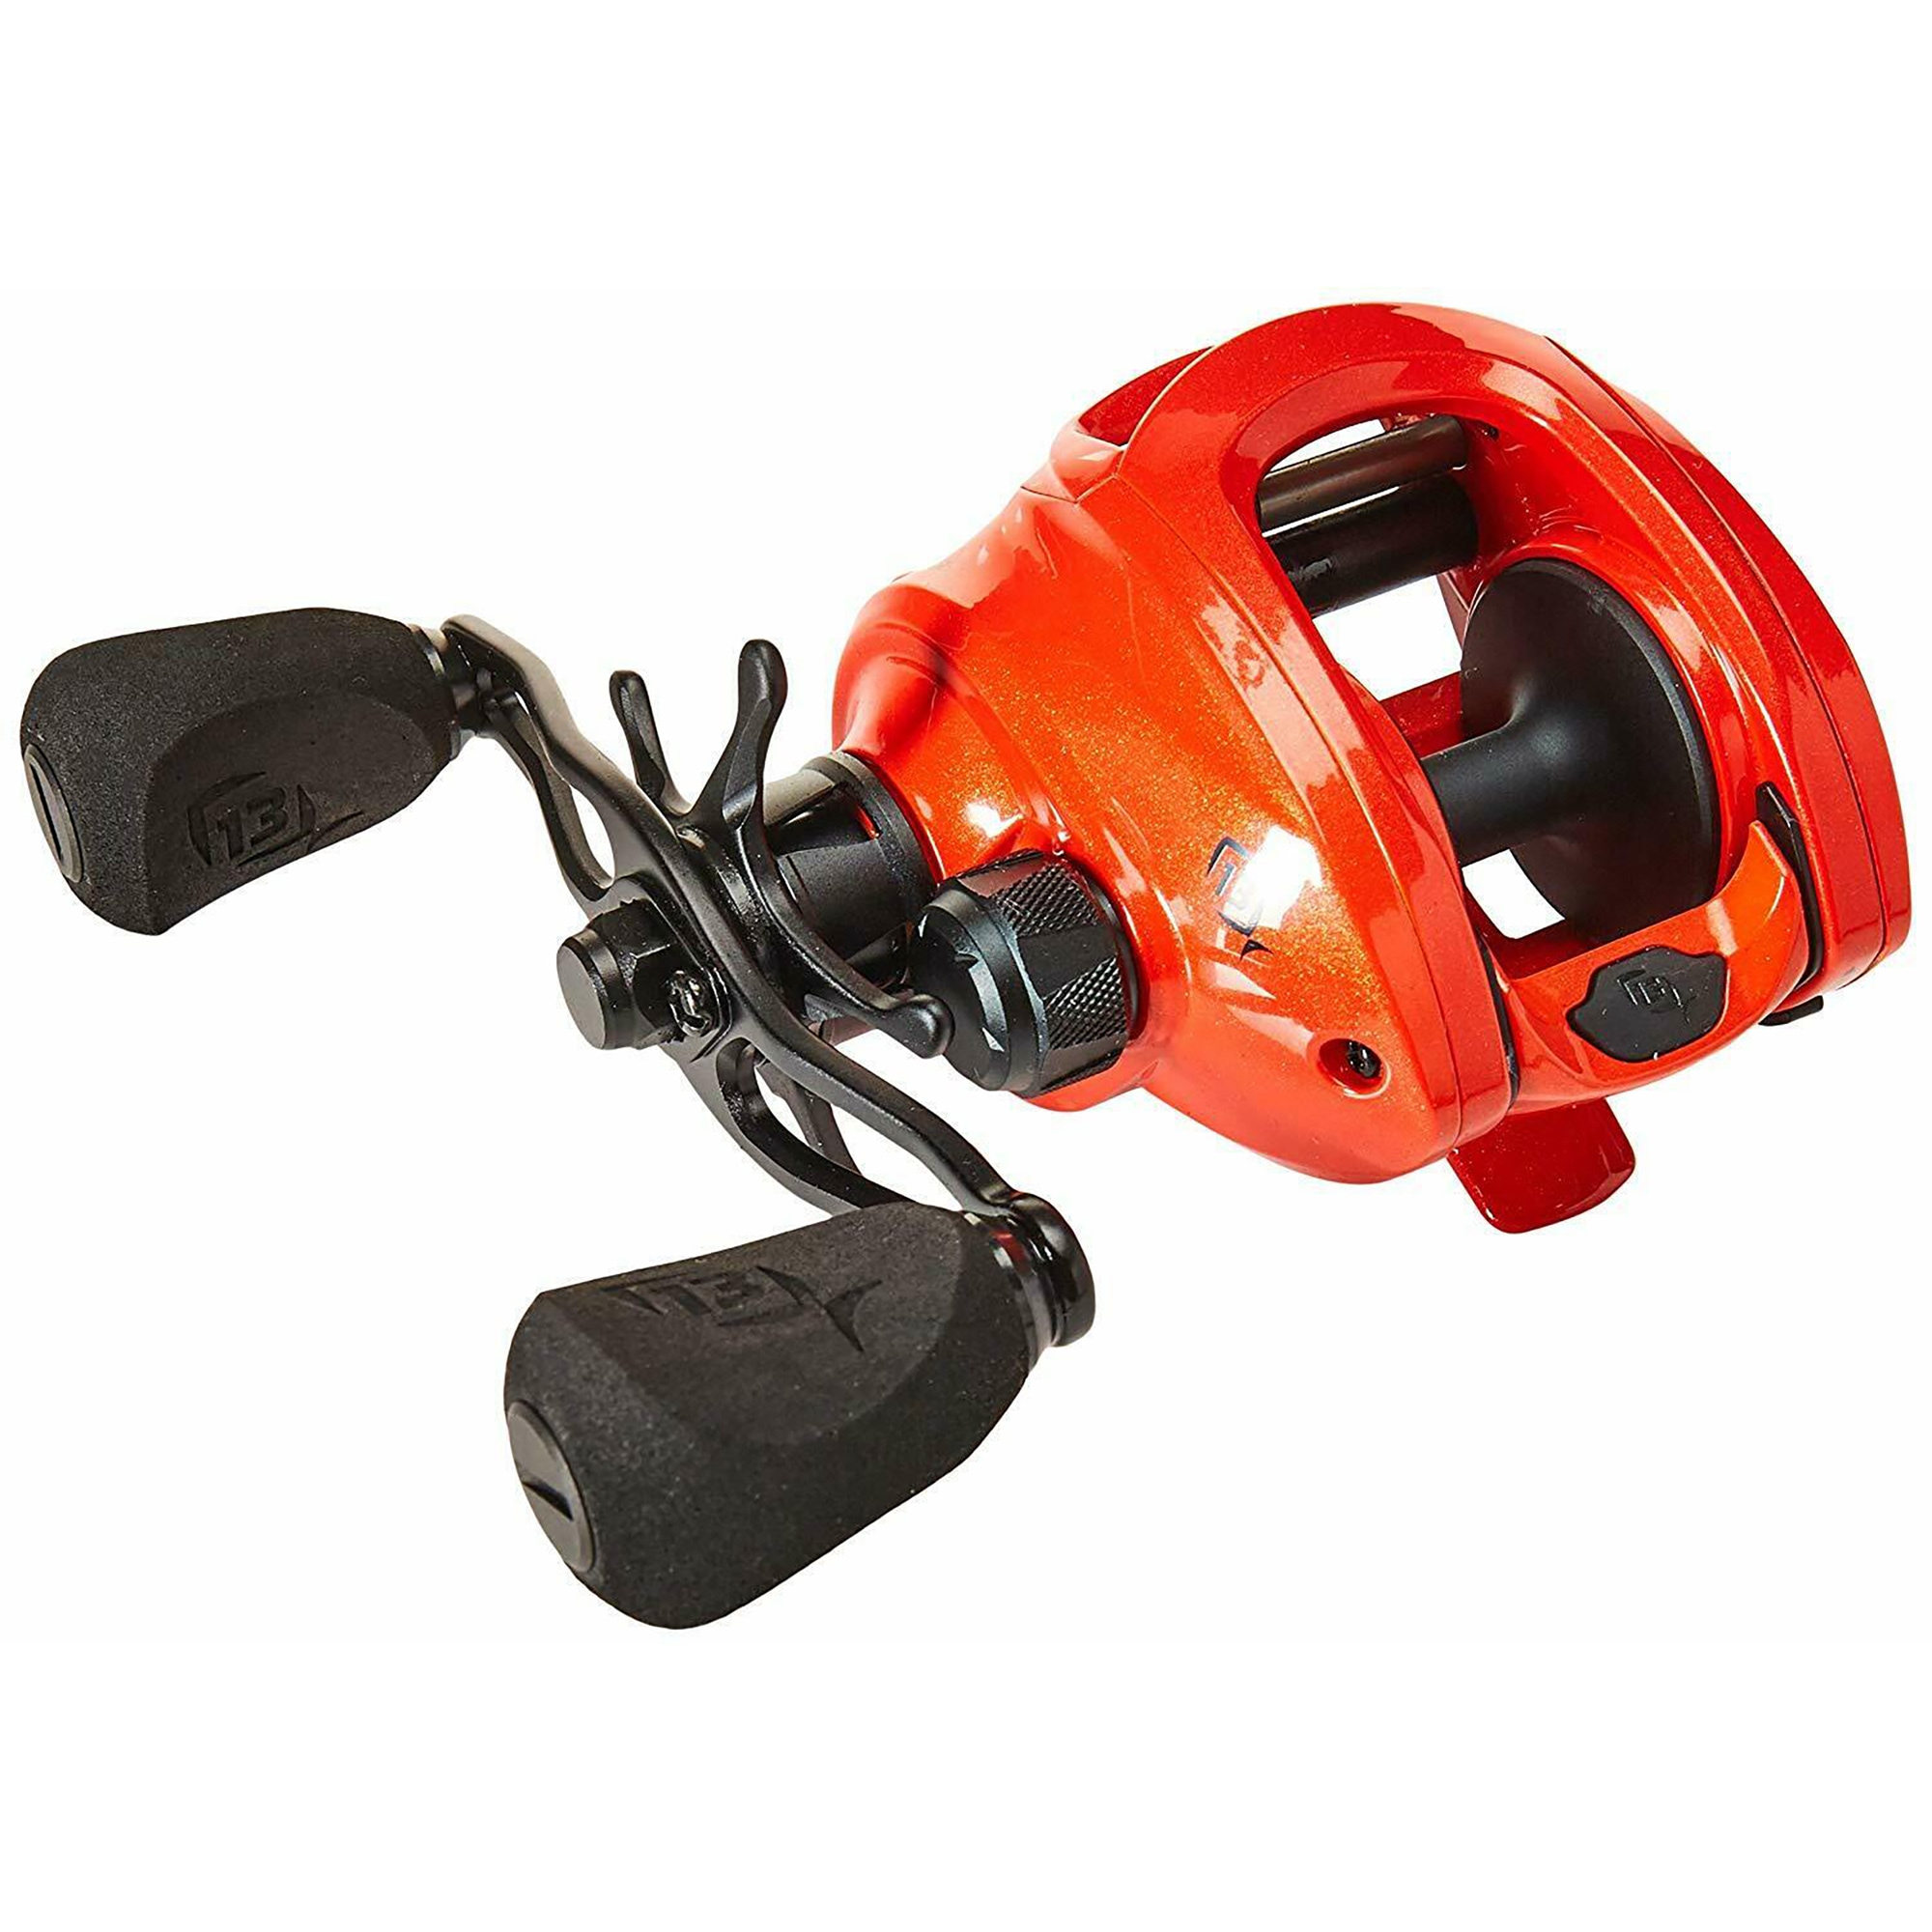 13 Fishing Concept Z Casting Reel Andy Thornal Company, 41% OFF